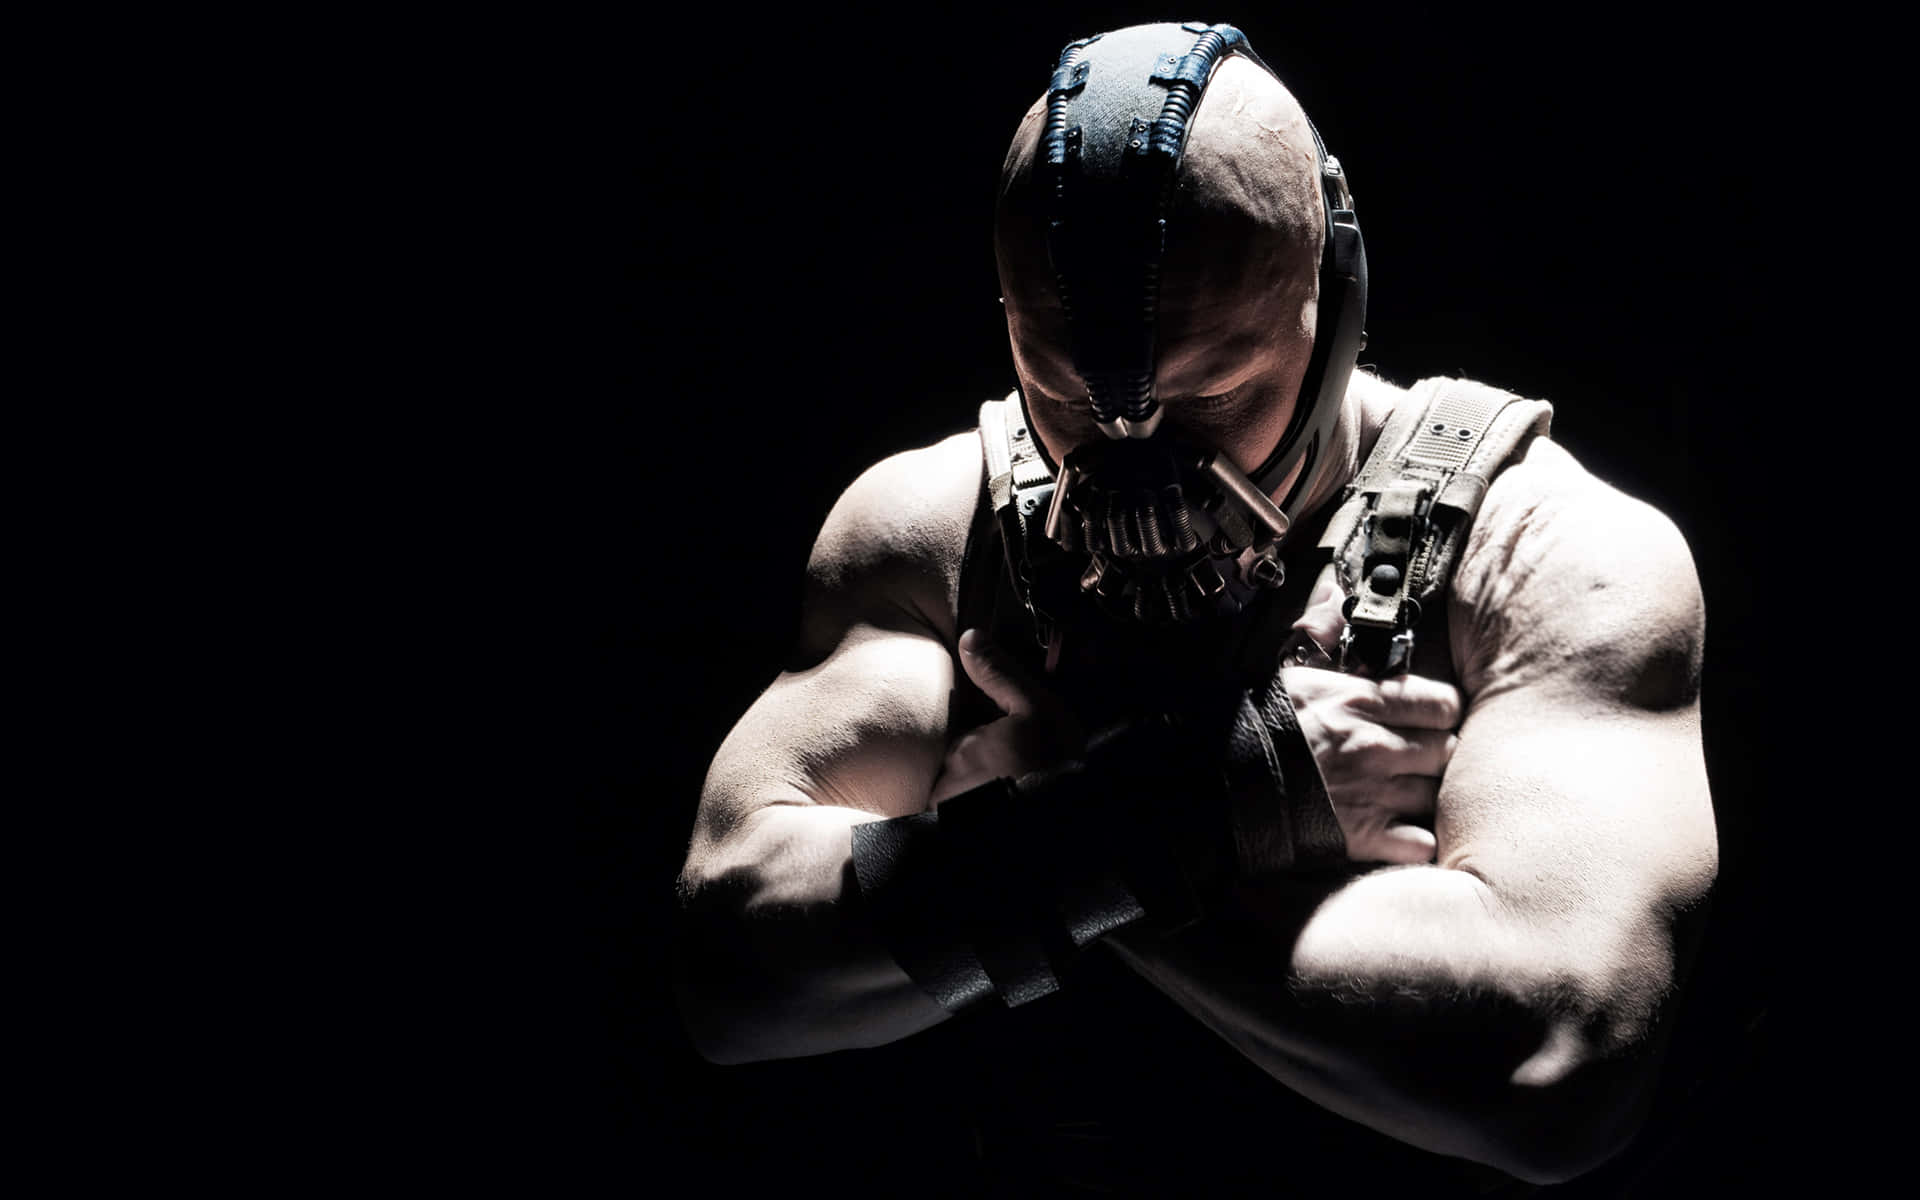 Unleash your inner power with the supervillain Bane Wallpaper